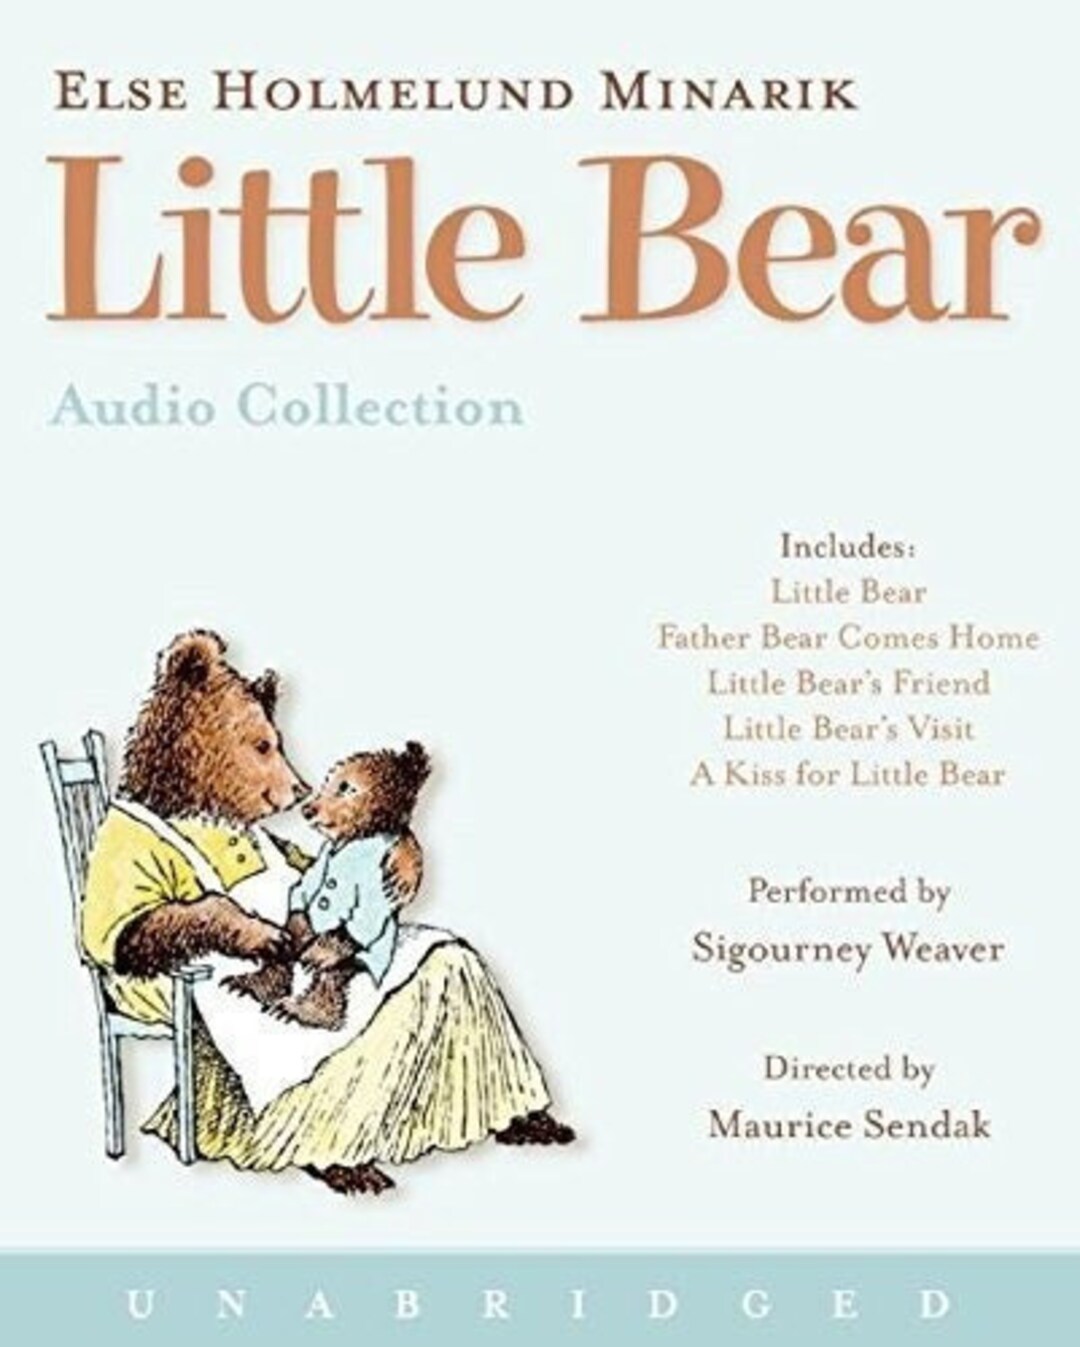 in　India　Buy　Factory　BEAR　Audio　Online　by　Book　Narrated　Sealed　LITTLE　Etsy